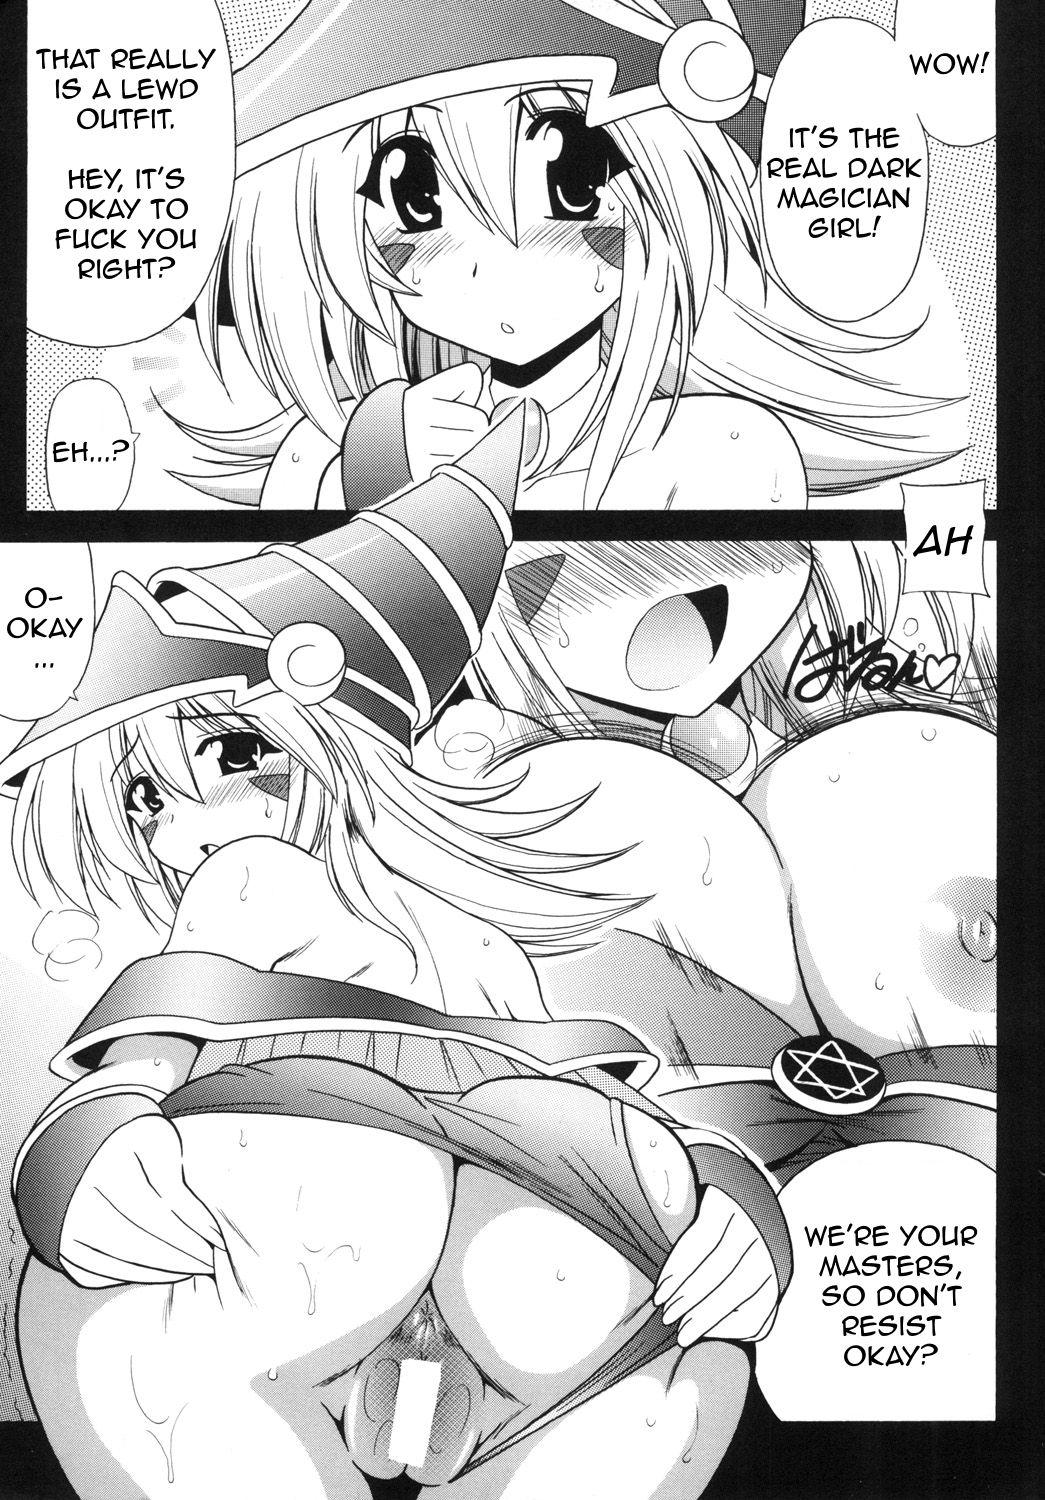 BMG to Ecchi Shiyou ♡ | Let's Have Sex with Dark Magician Girl ♡ 3